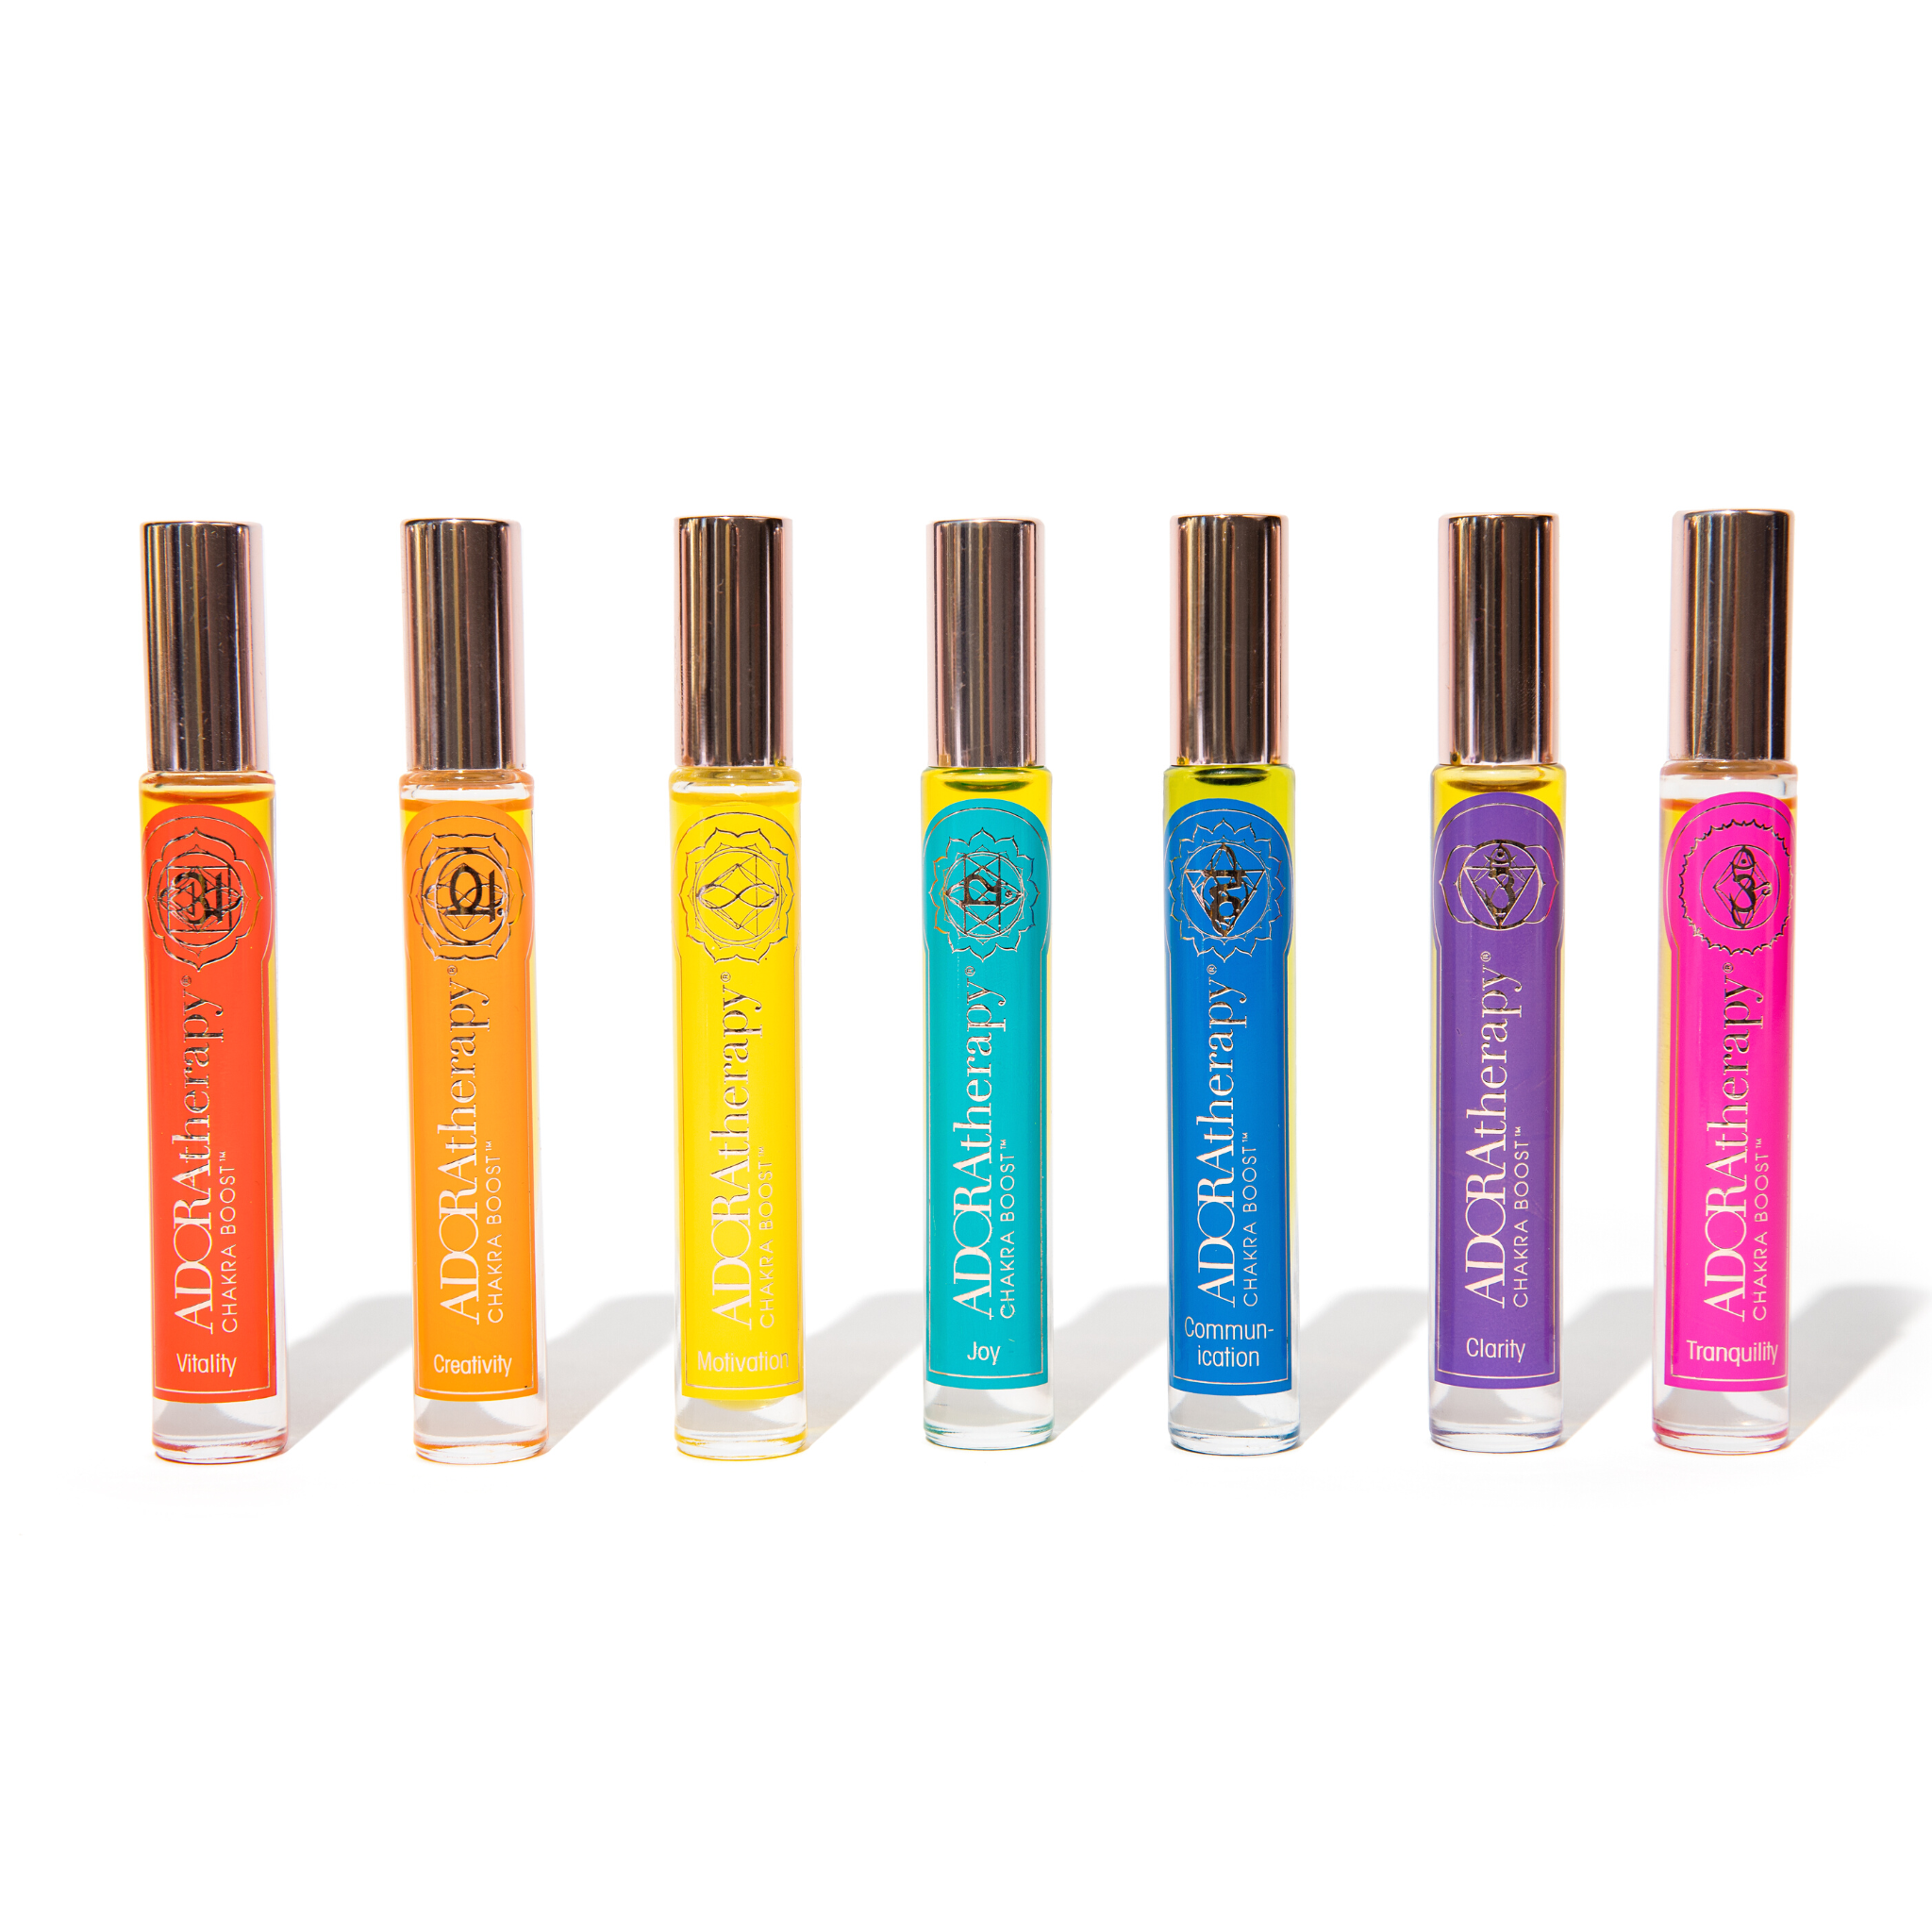 Chakra 3 Motivation Roll On Perfume Oil 10ML by Adoratherapy.com